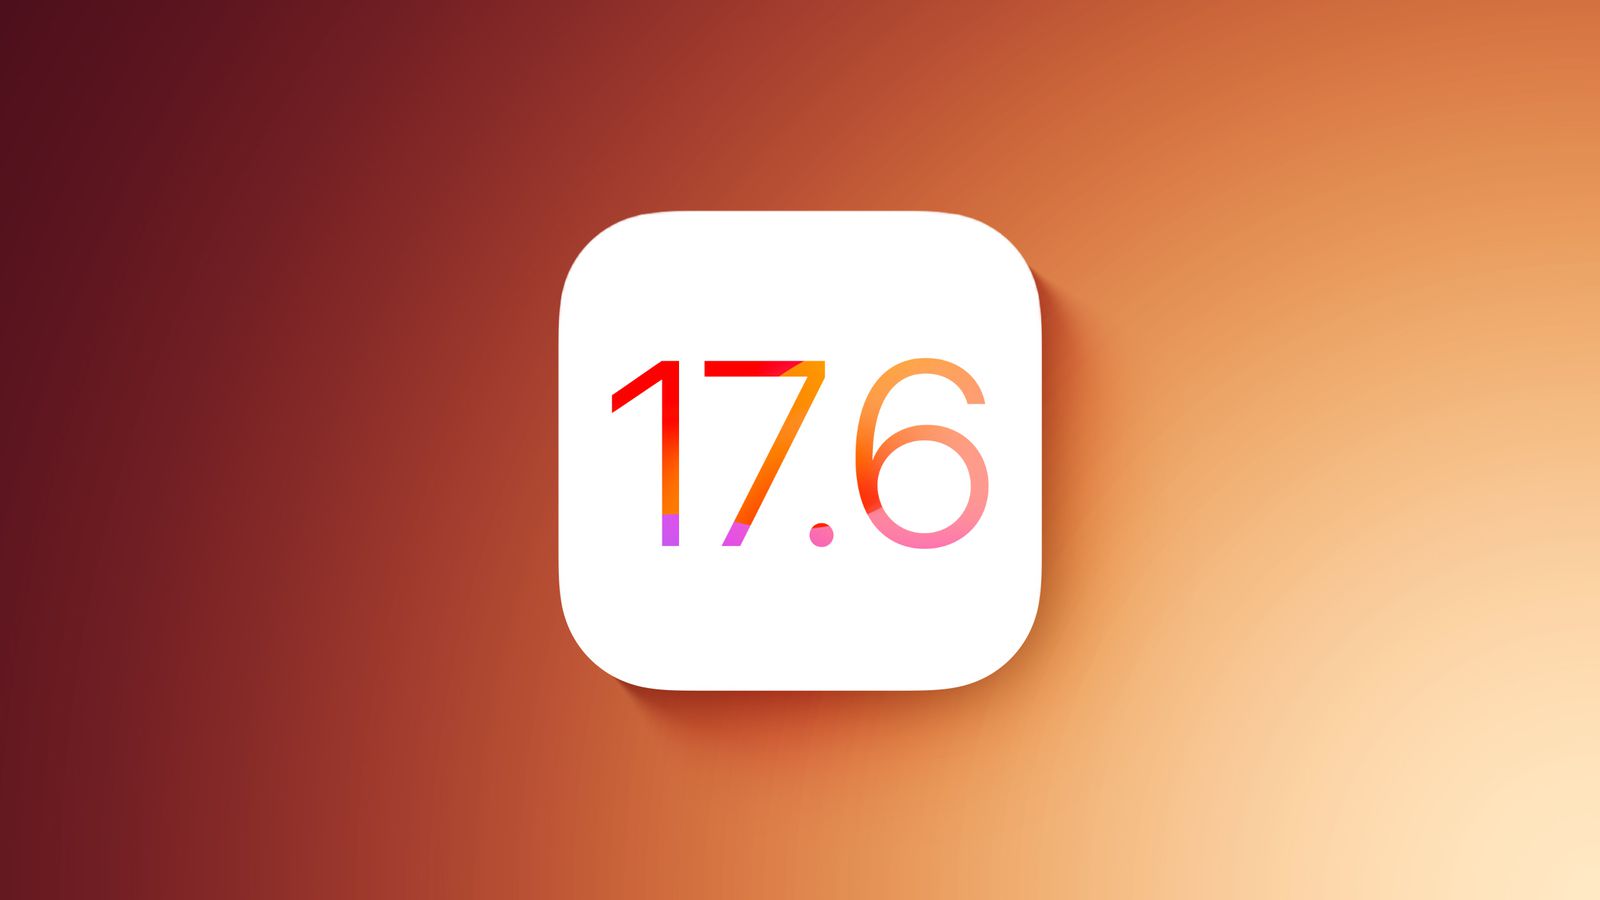 A stable release is just around the corner: Apple has released iOS 17.6 and iPadOS 17.6 Release Candidates